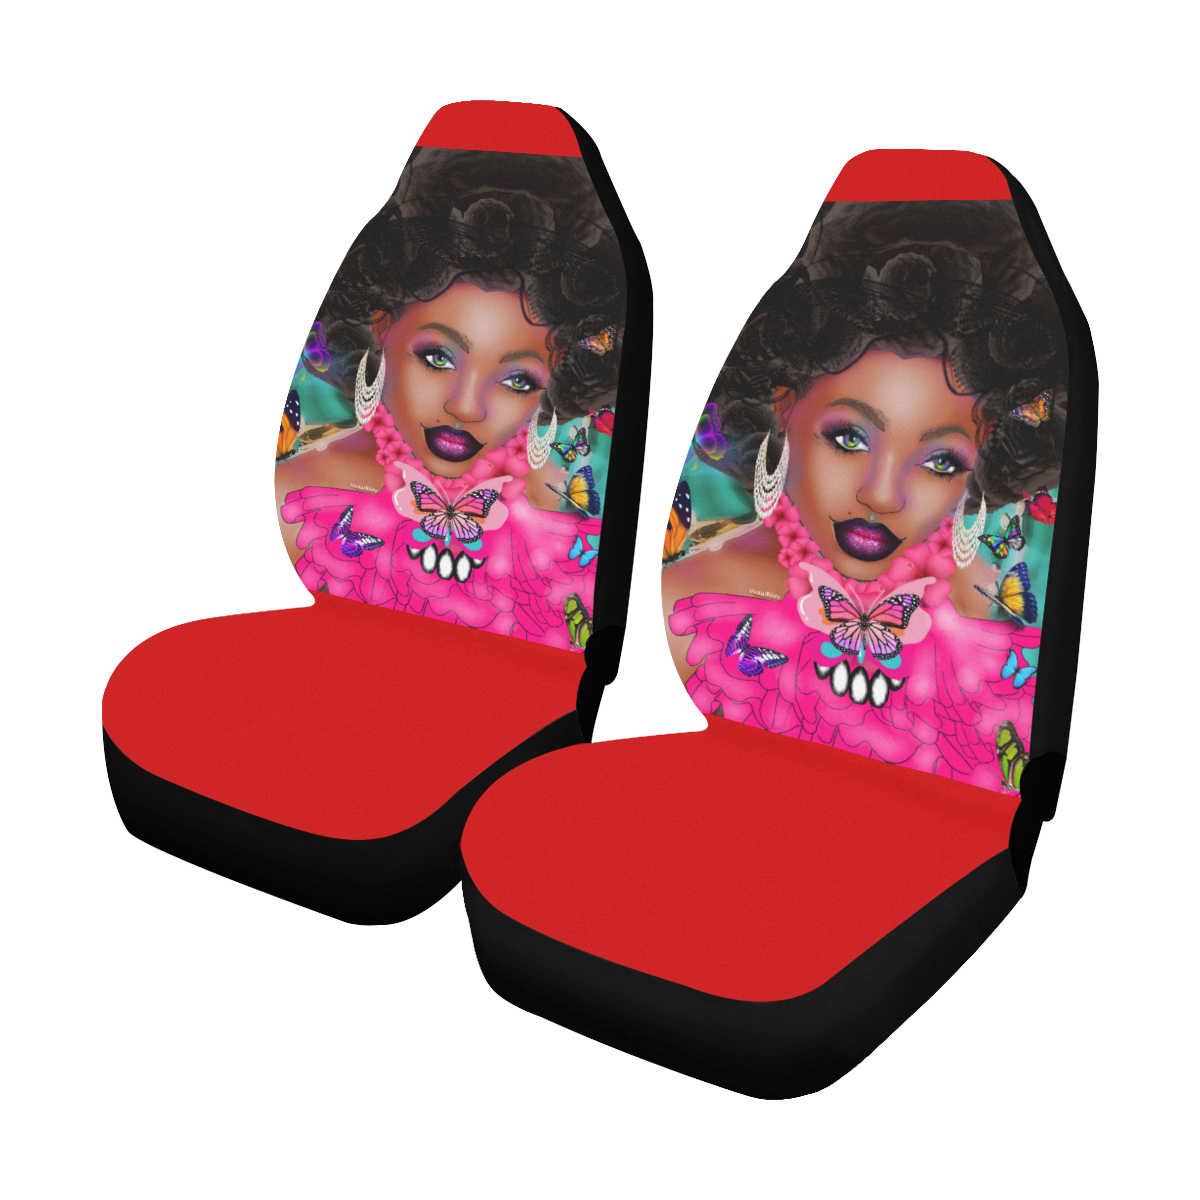 FLYYAYY SEAT COV RED Car Seat Covers (Set of 2)